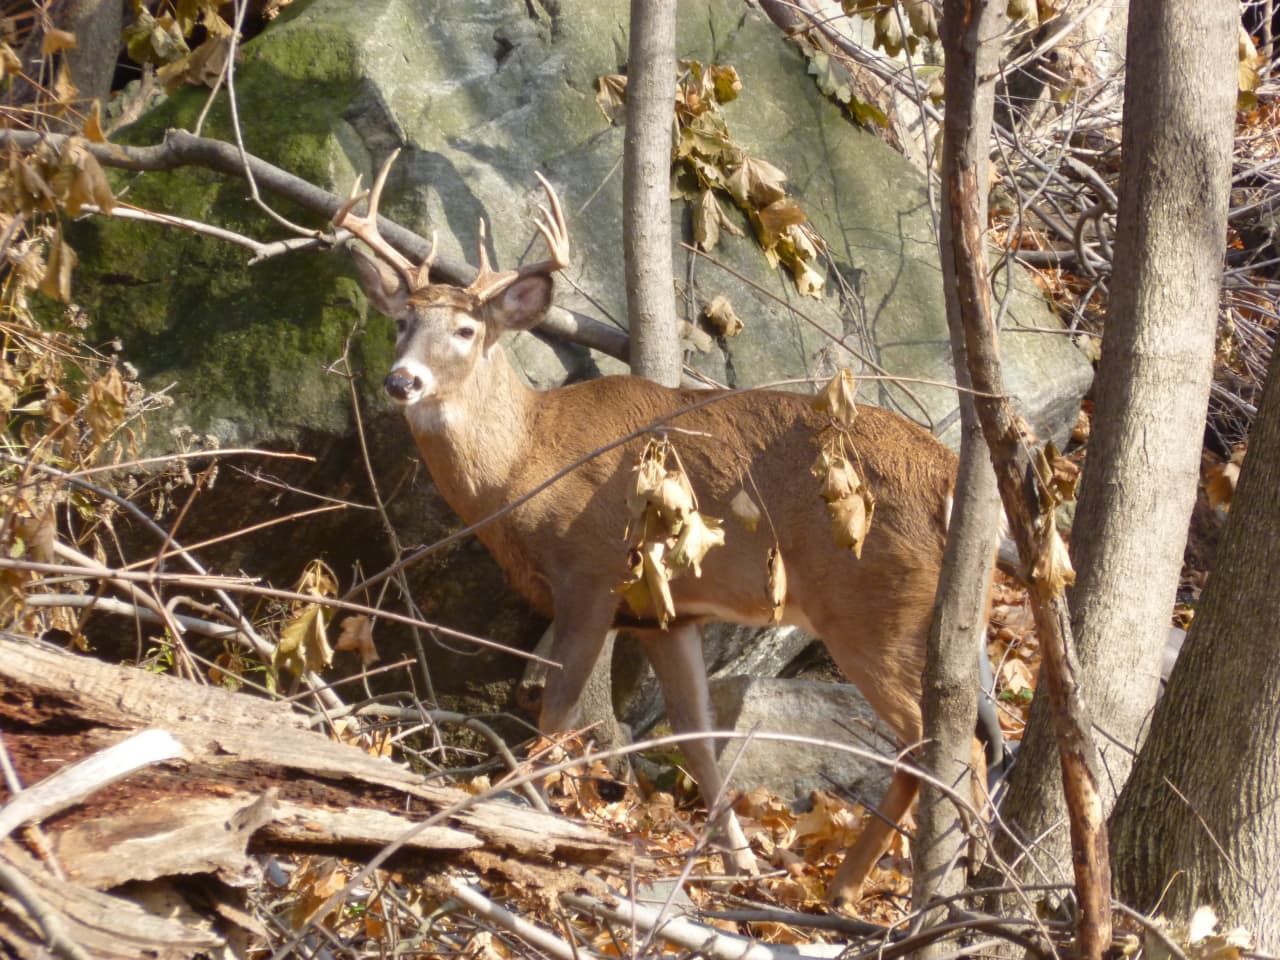 This Dobbs Ferry deer sighted at the Springhurst School may be related to a family in Hastings where the village plans to use birth control on deer beginning in 2014.